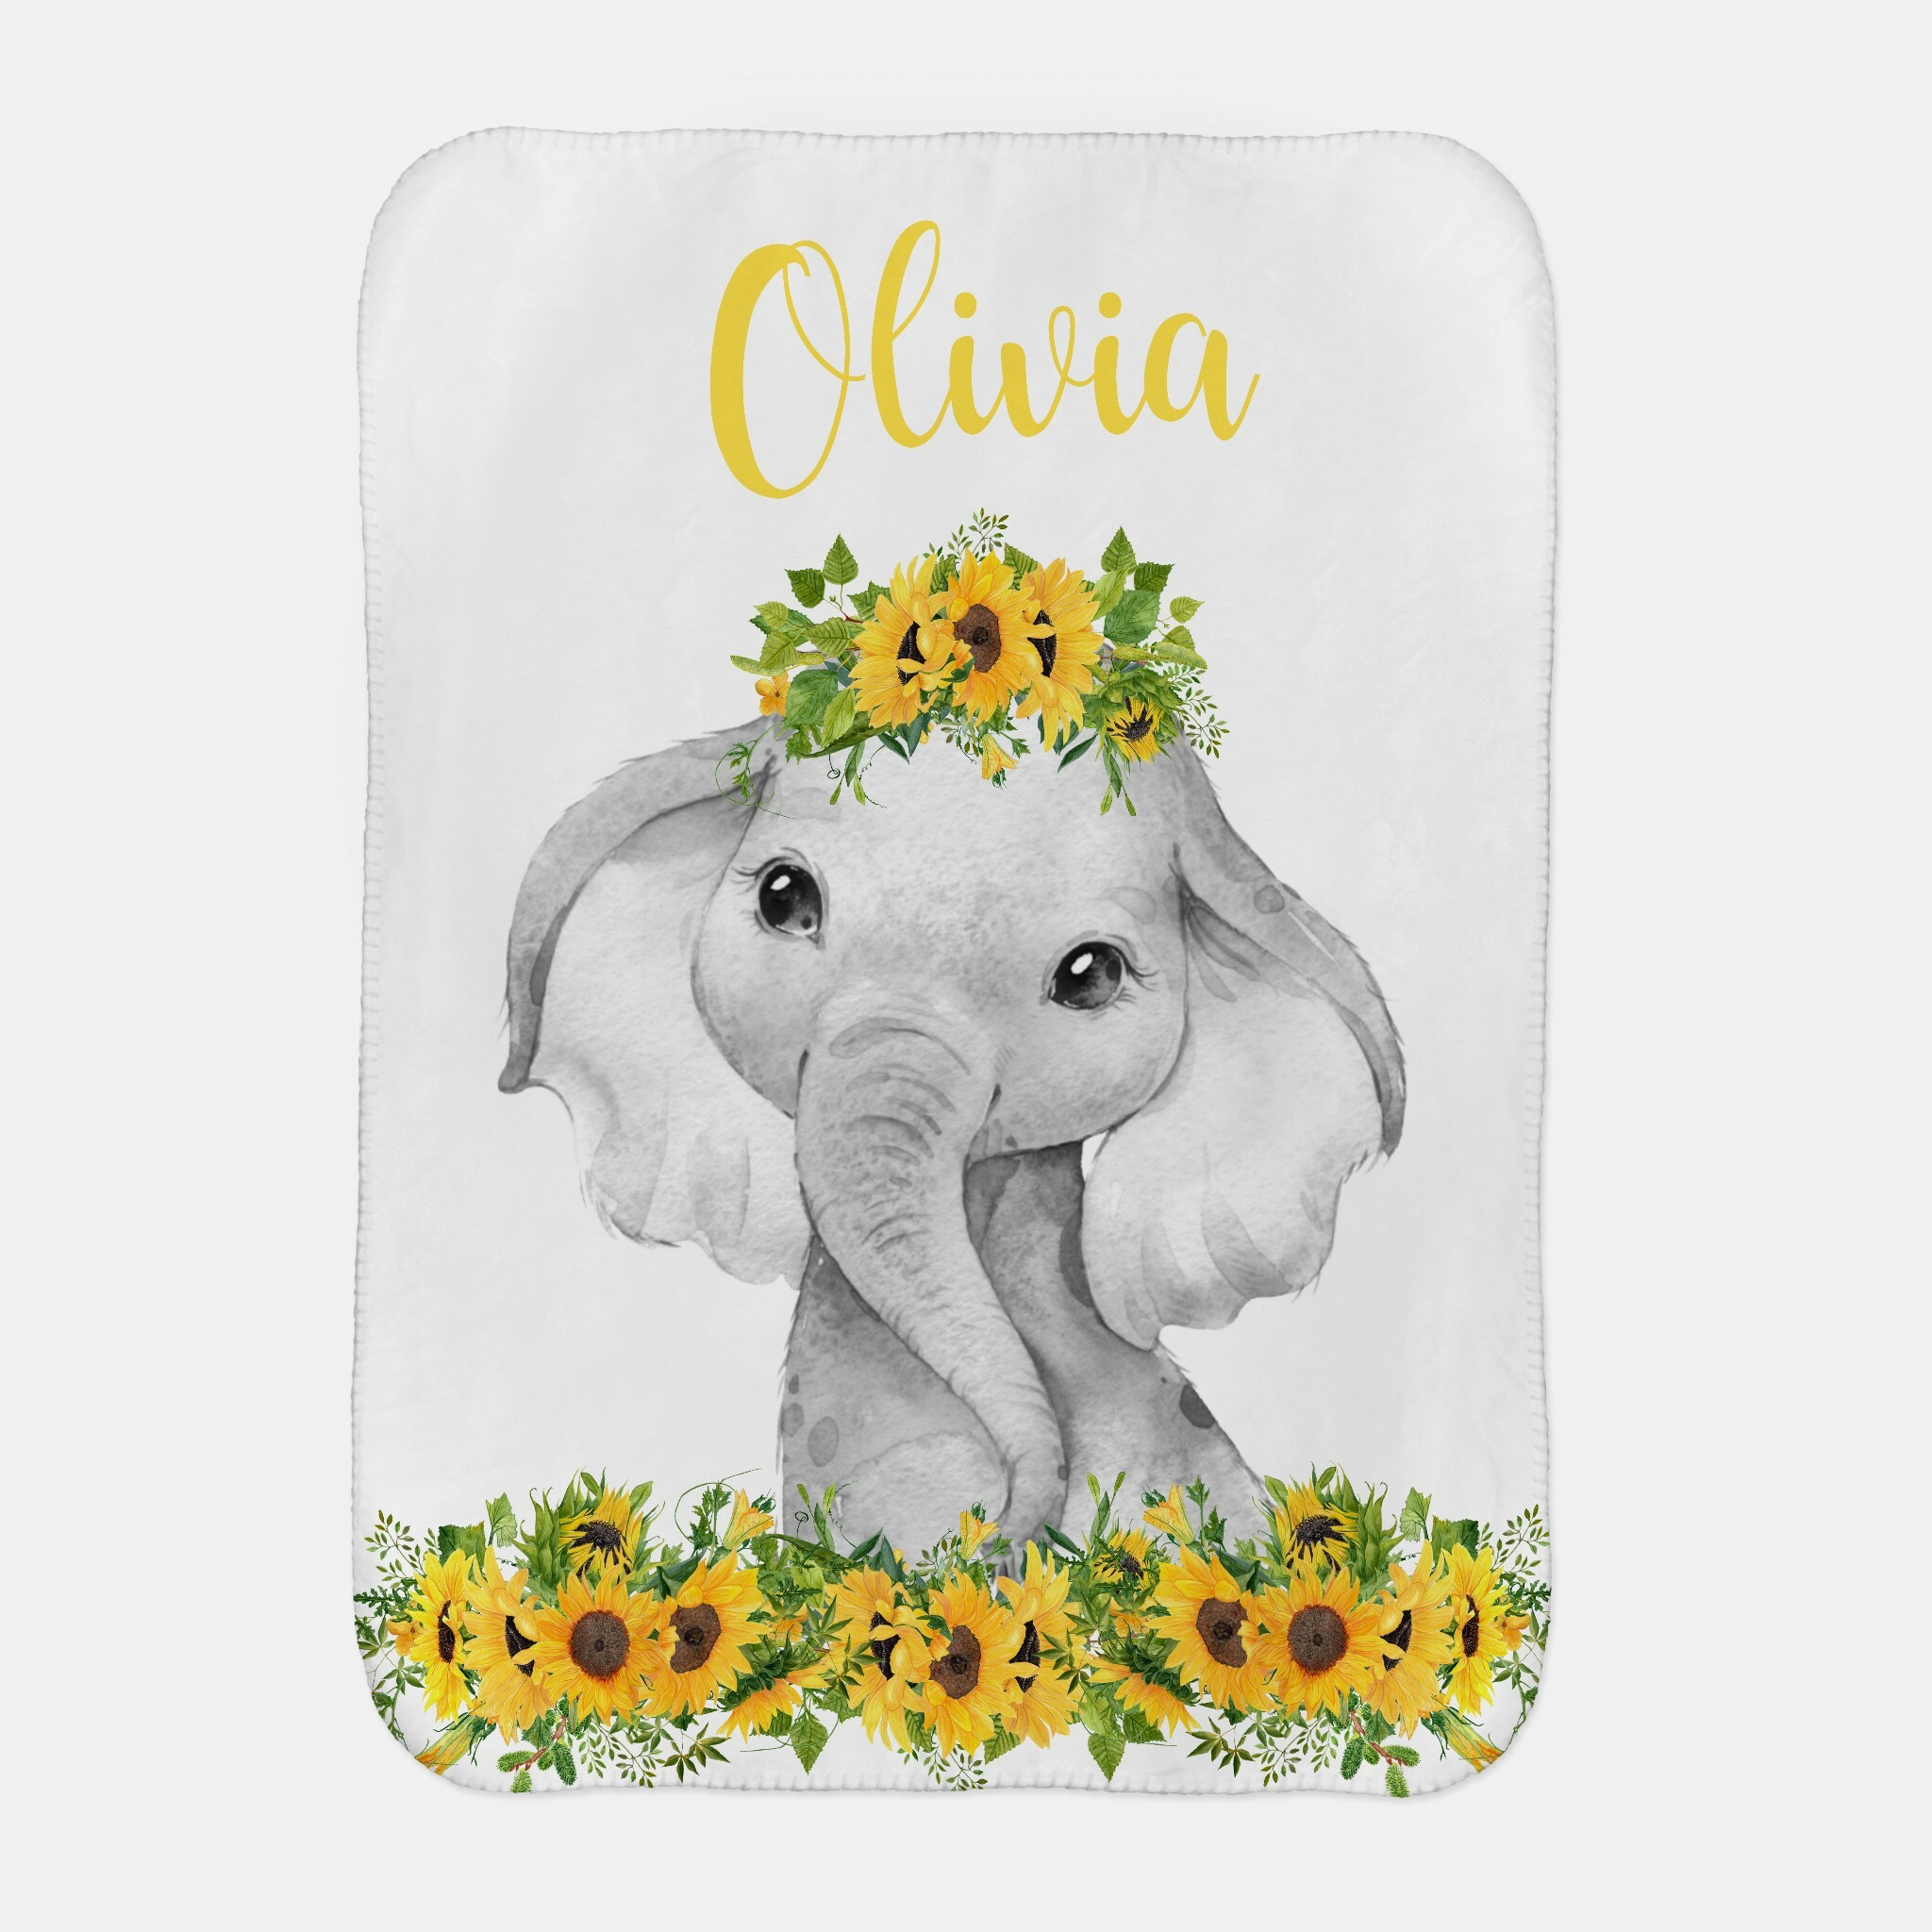 Personalized Baby Girl Blanket Elephant Sunflowers Floral Nursery Decor New Baby Shower Gift Dezignerheart Designs Personalized Baby Nursery Decor Gifts Canvas Wall Art Prints Baby